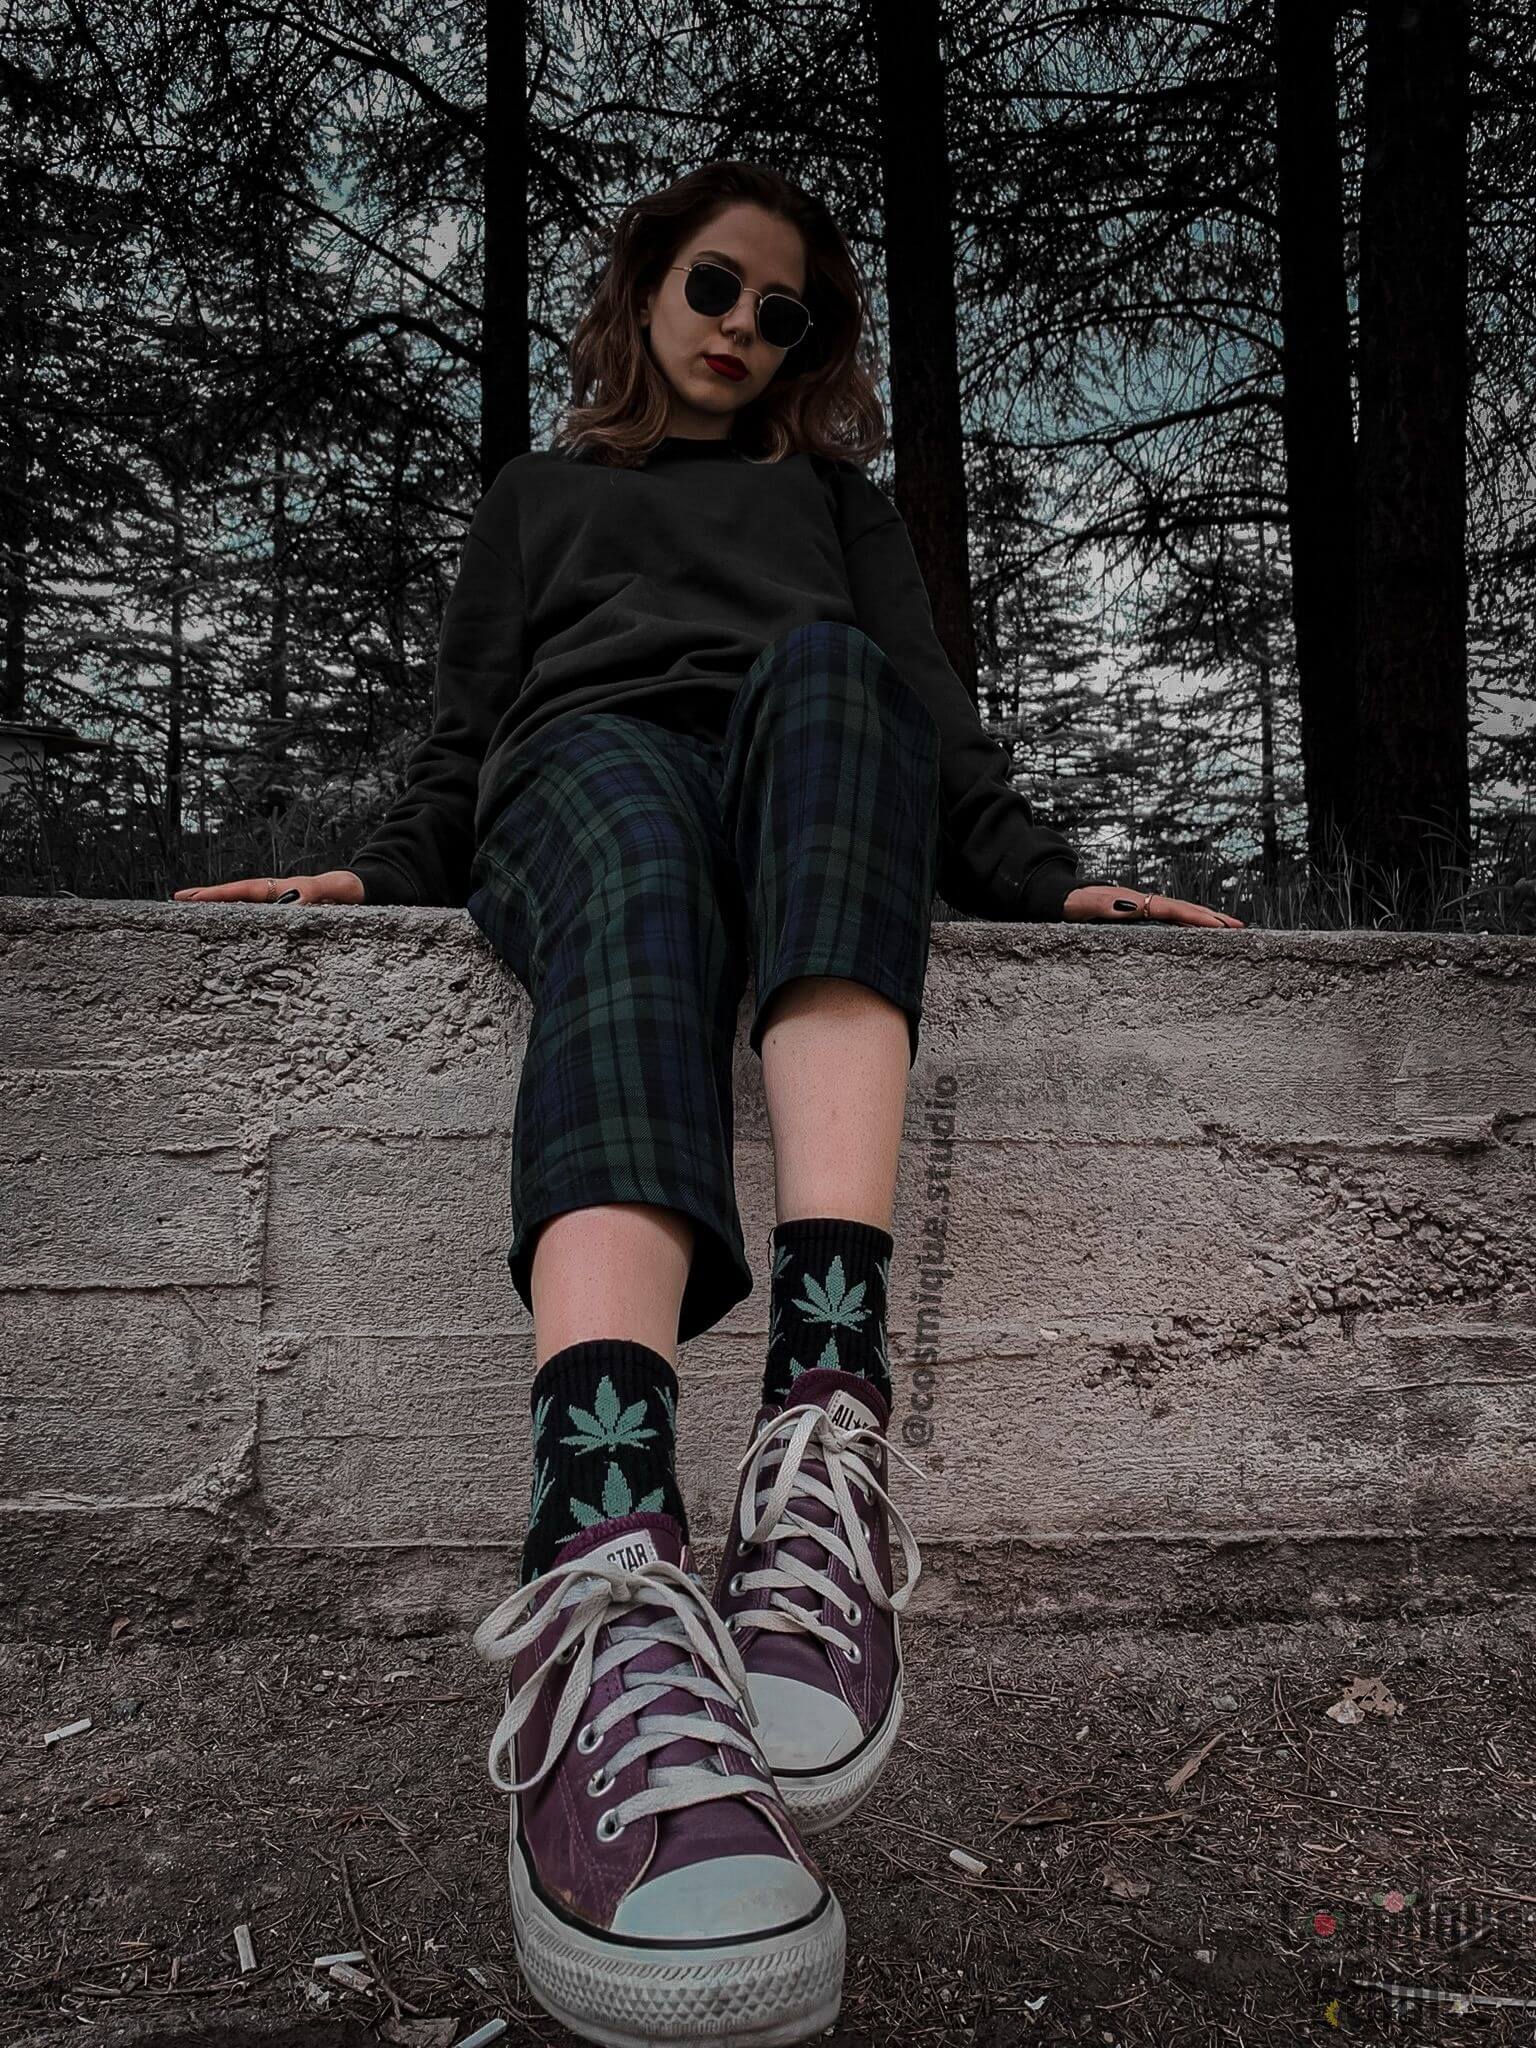 grunge aesthetic girl in the forest, wearing weed socks and leather purple converse under a plaid baggy green pants and a green hoodie 